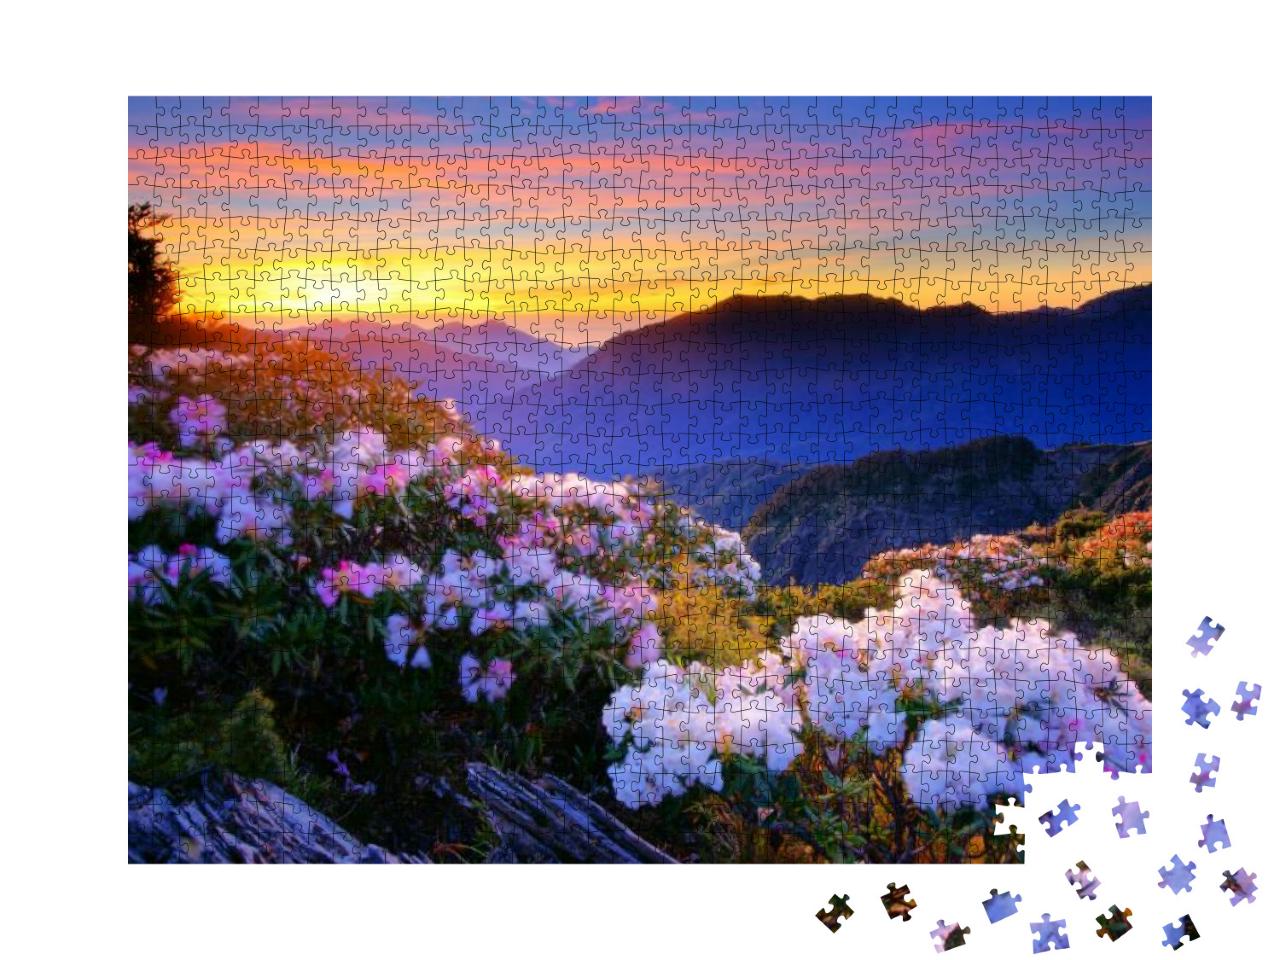 Spring Twilight Scenery of Hehuan Mountain North Peak, Re... Jigsaw Puzzle with 1000 pieces